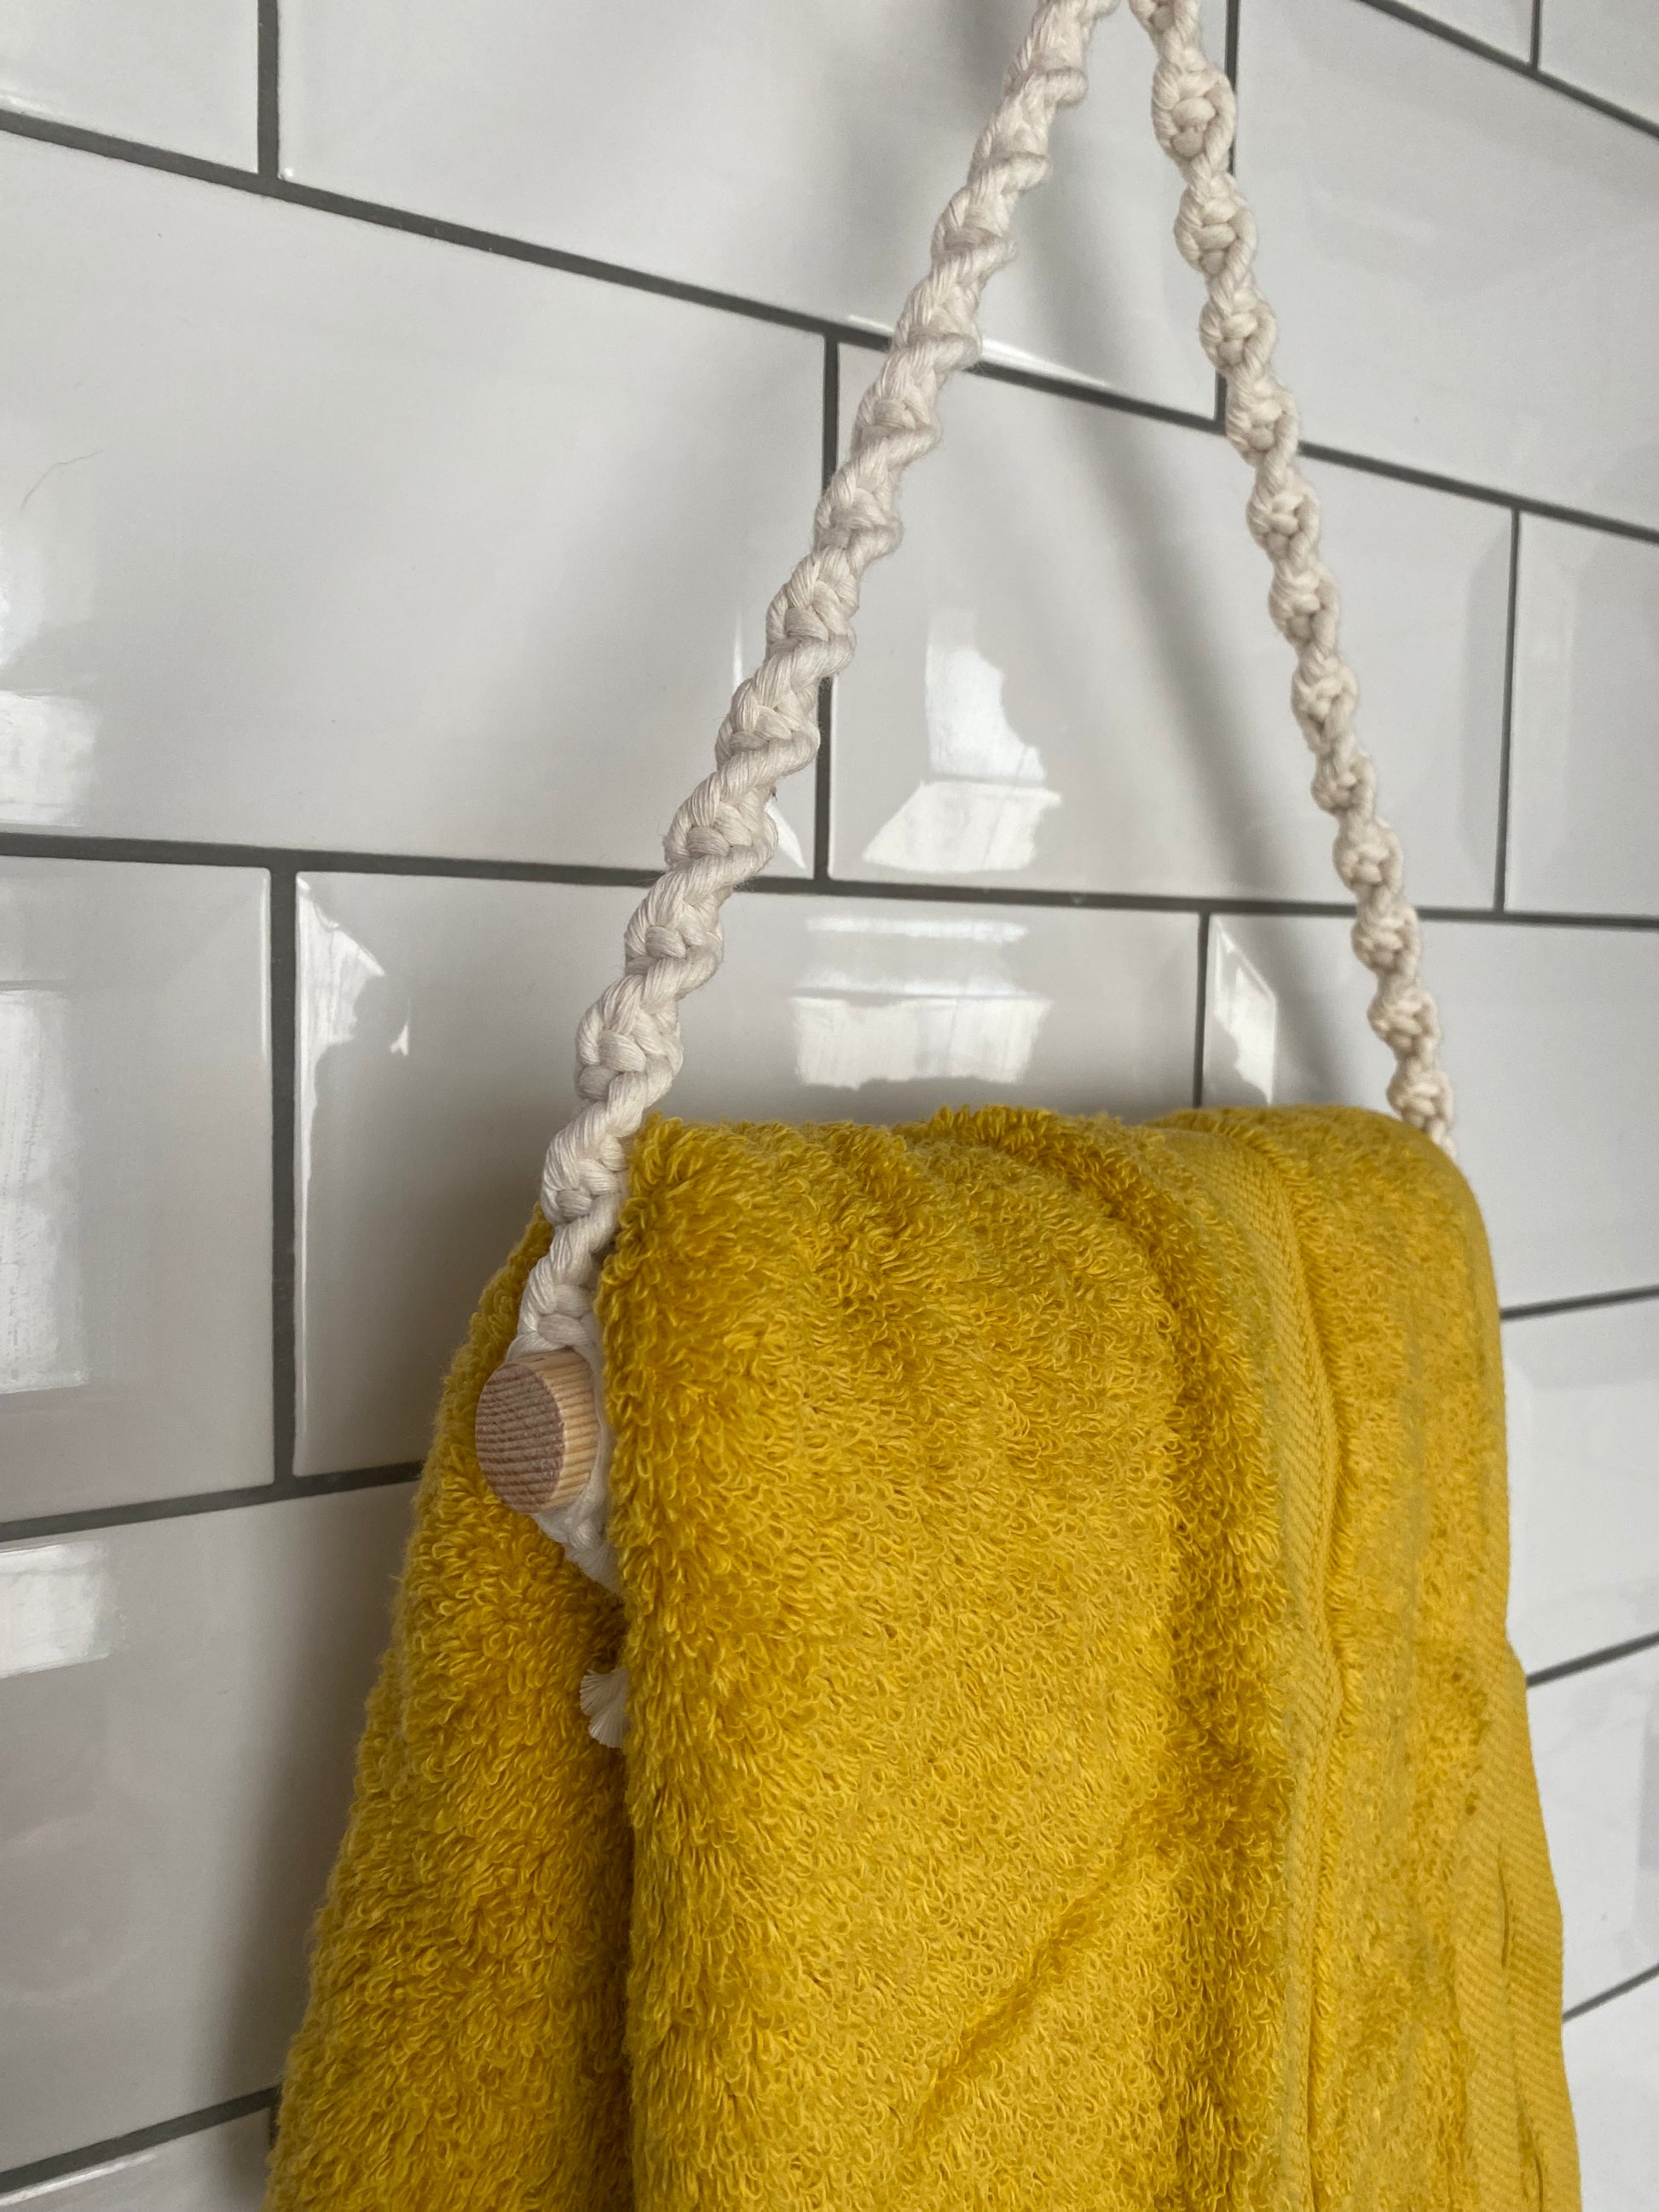 A yellow towel hangs on a **Hand towel holder by Macra-Made-With-Love**, made from sustainable recycled cotton, attached to a white tiled wall. The rope is knotted in a decorative pattern, adding an artistic touch to the practical setup. The tiles have a glossy finish and are arranged in a horizontal subway pattern.